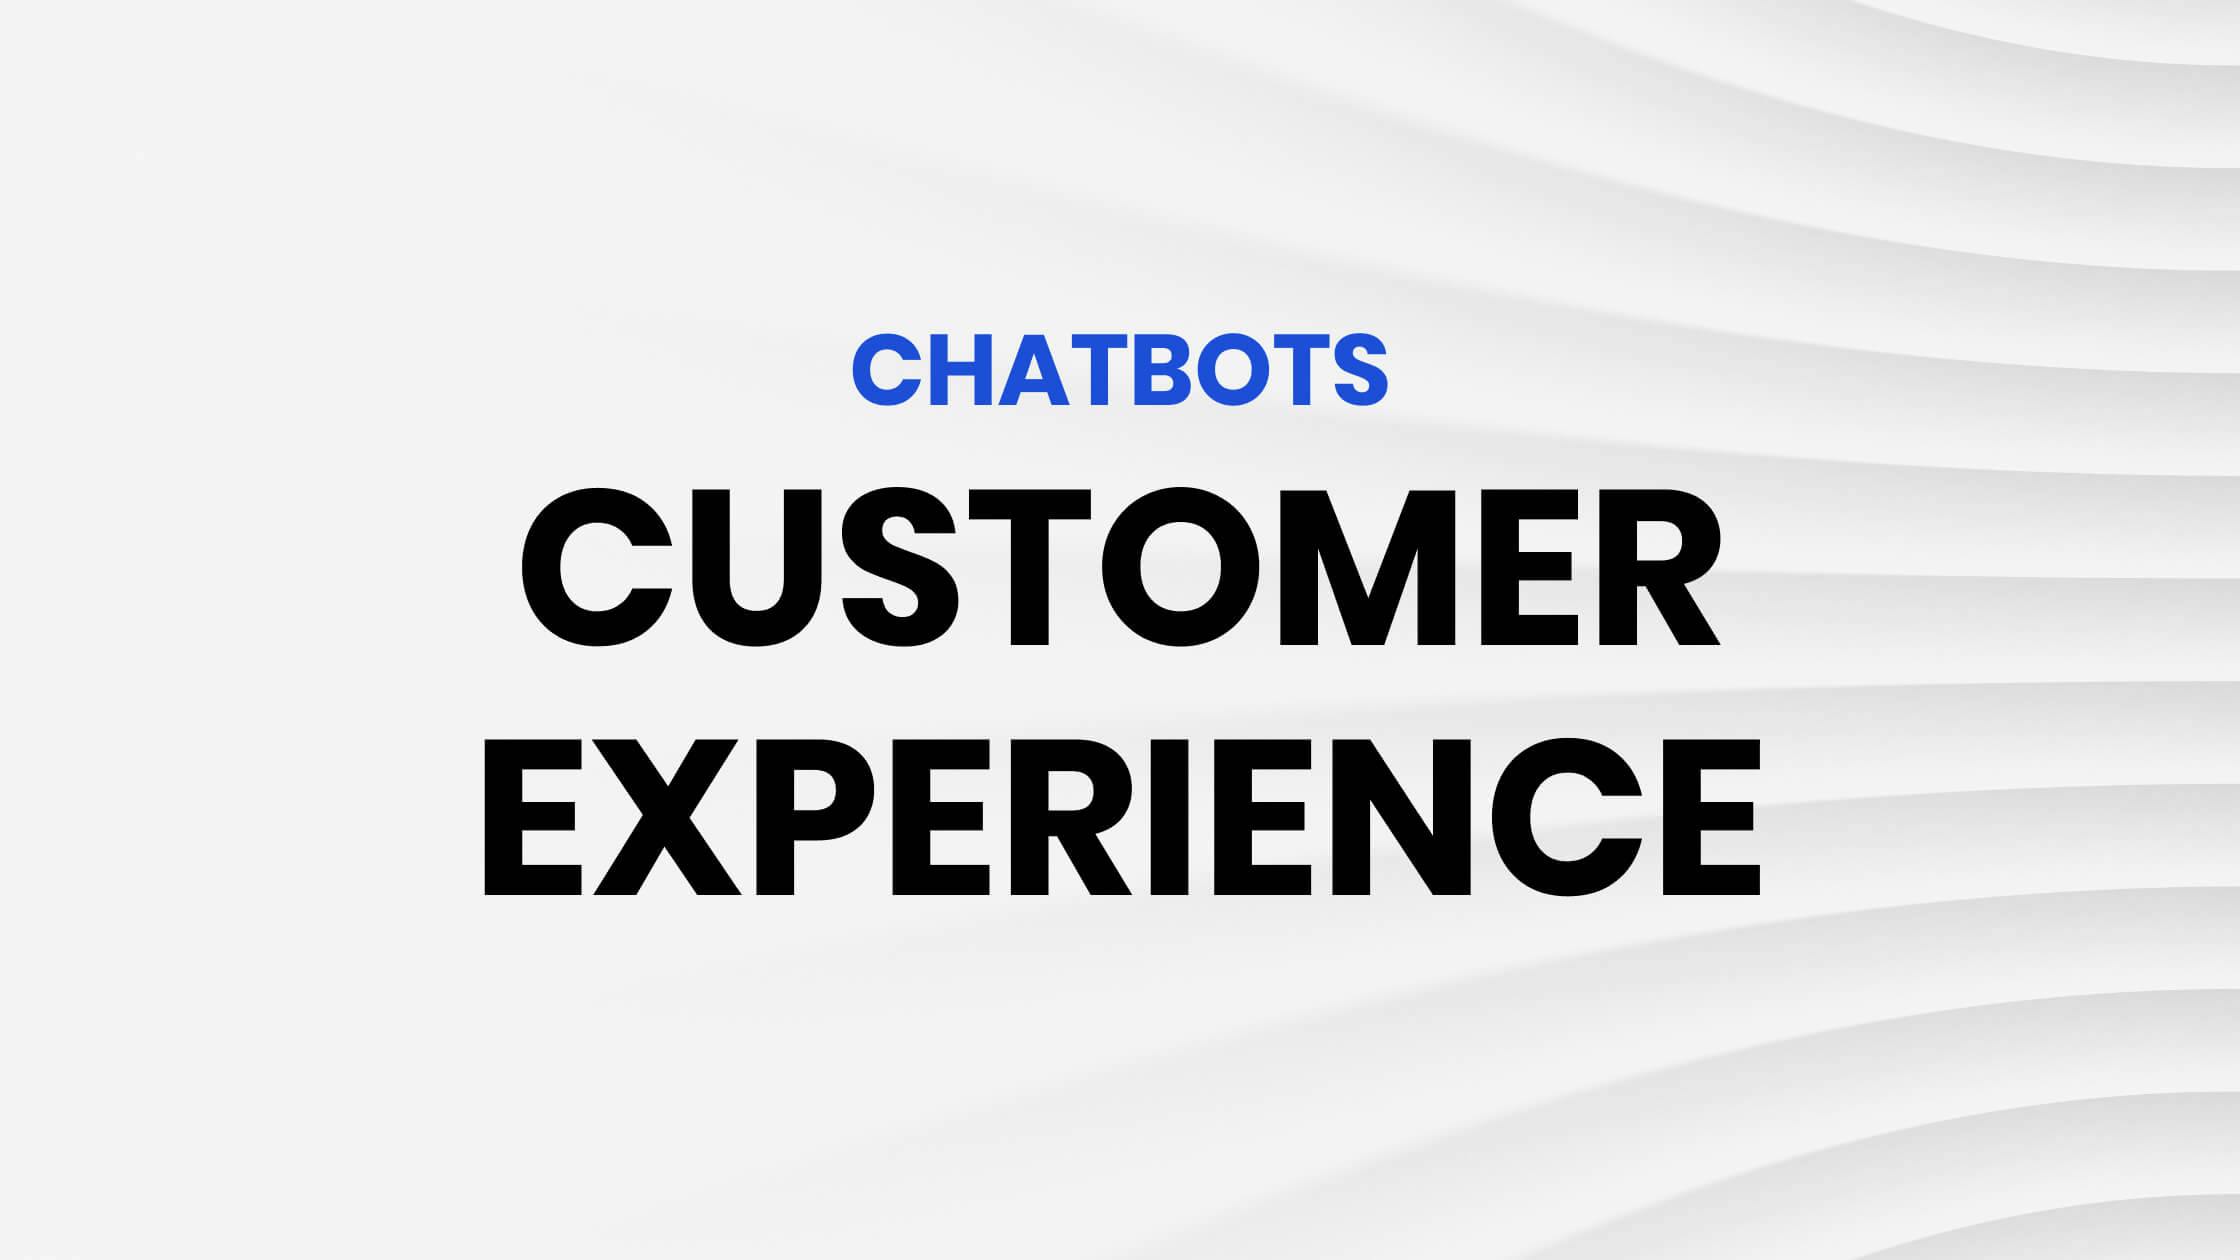 We Examine How Chatbots Can Improve Your Customer Experience